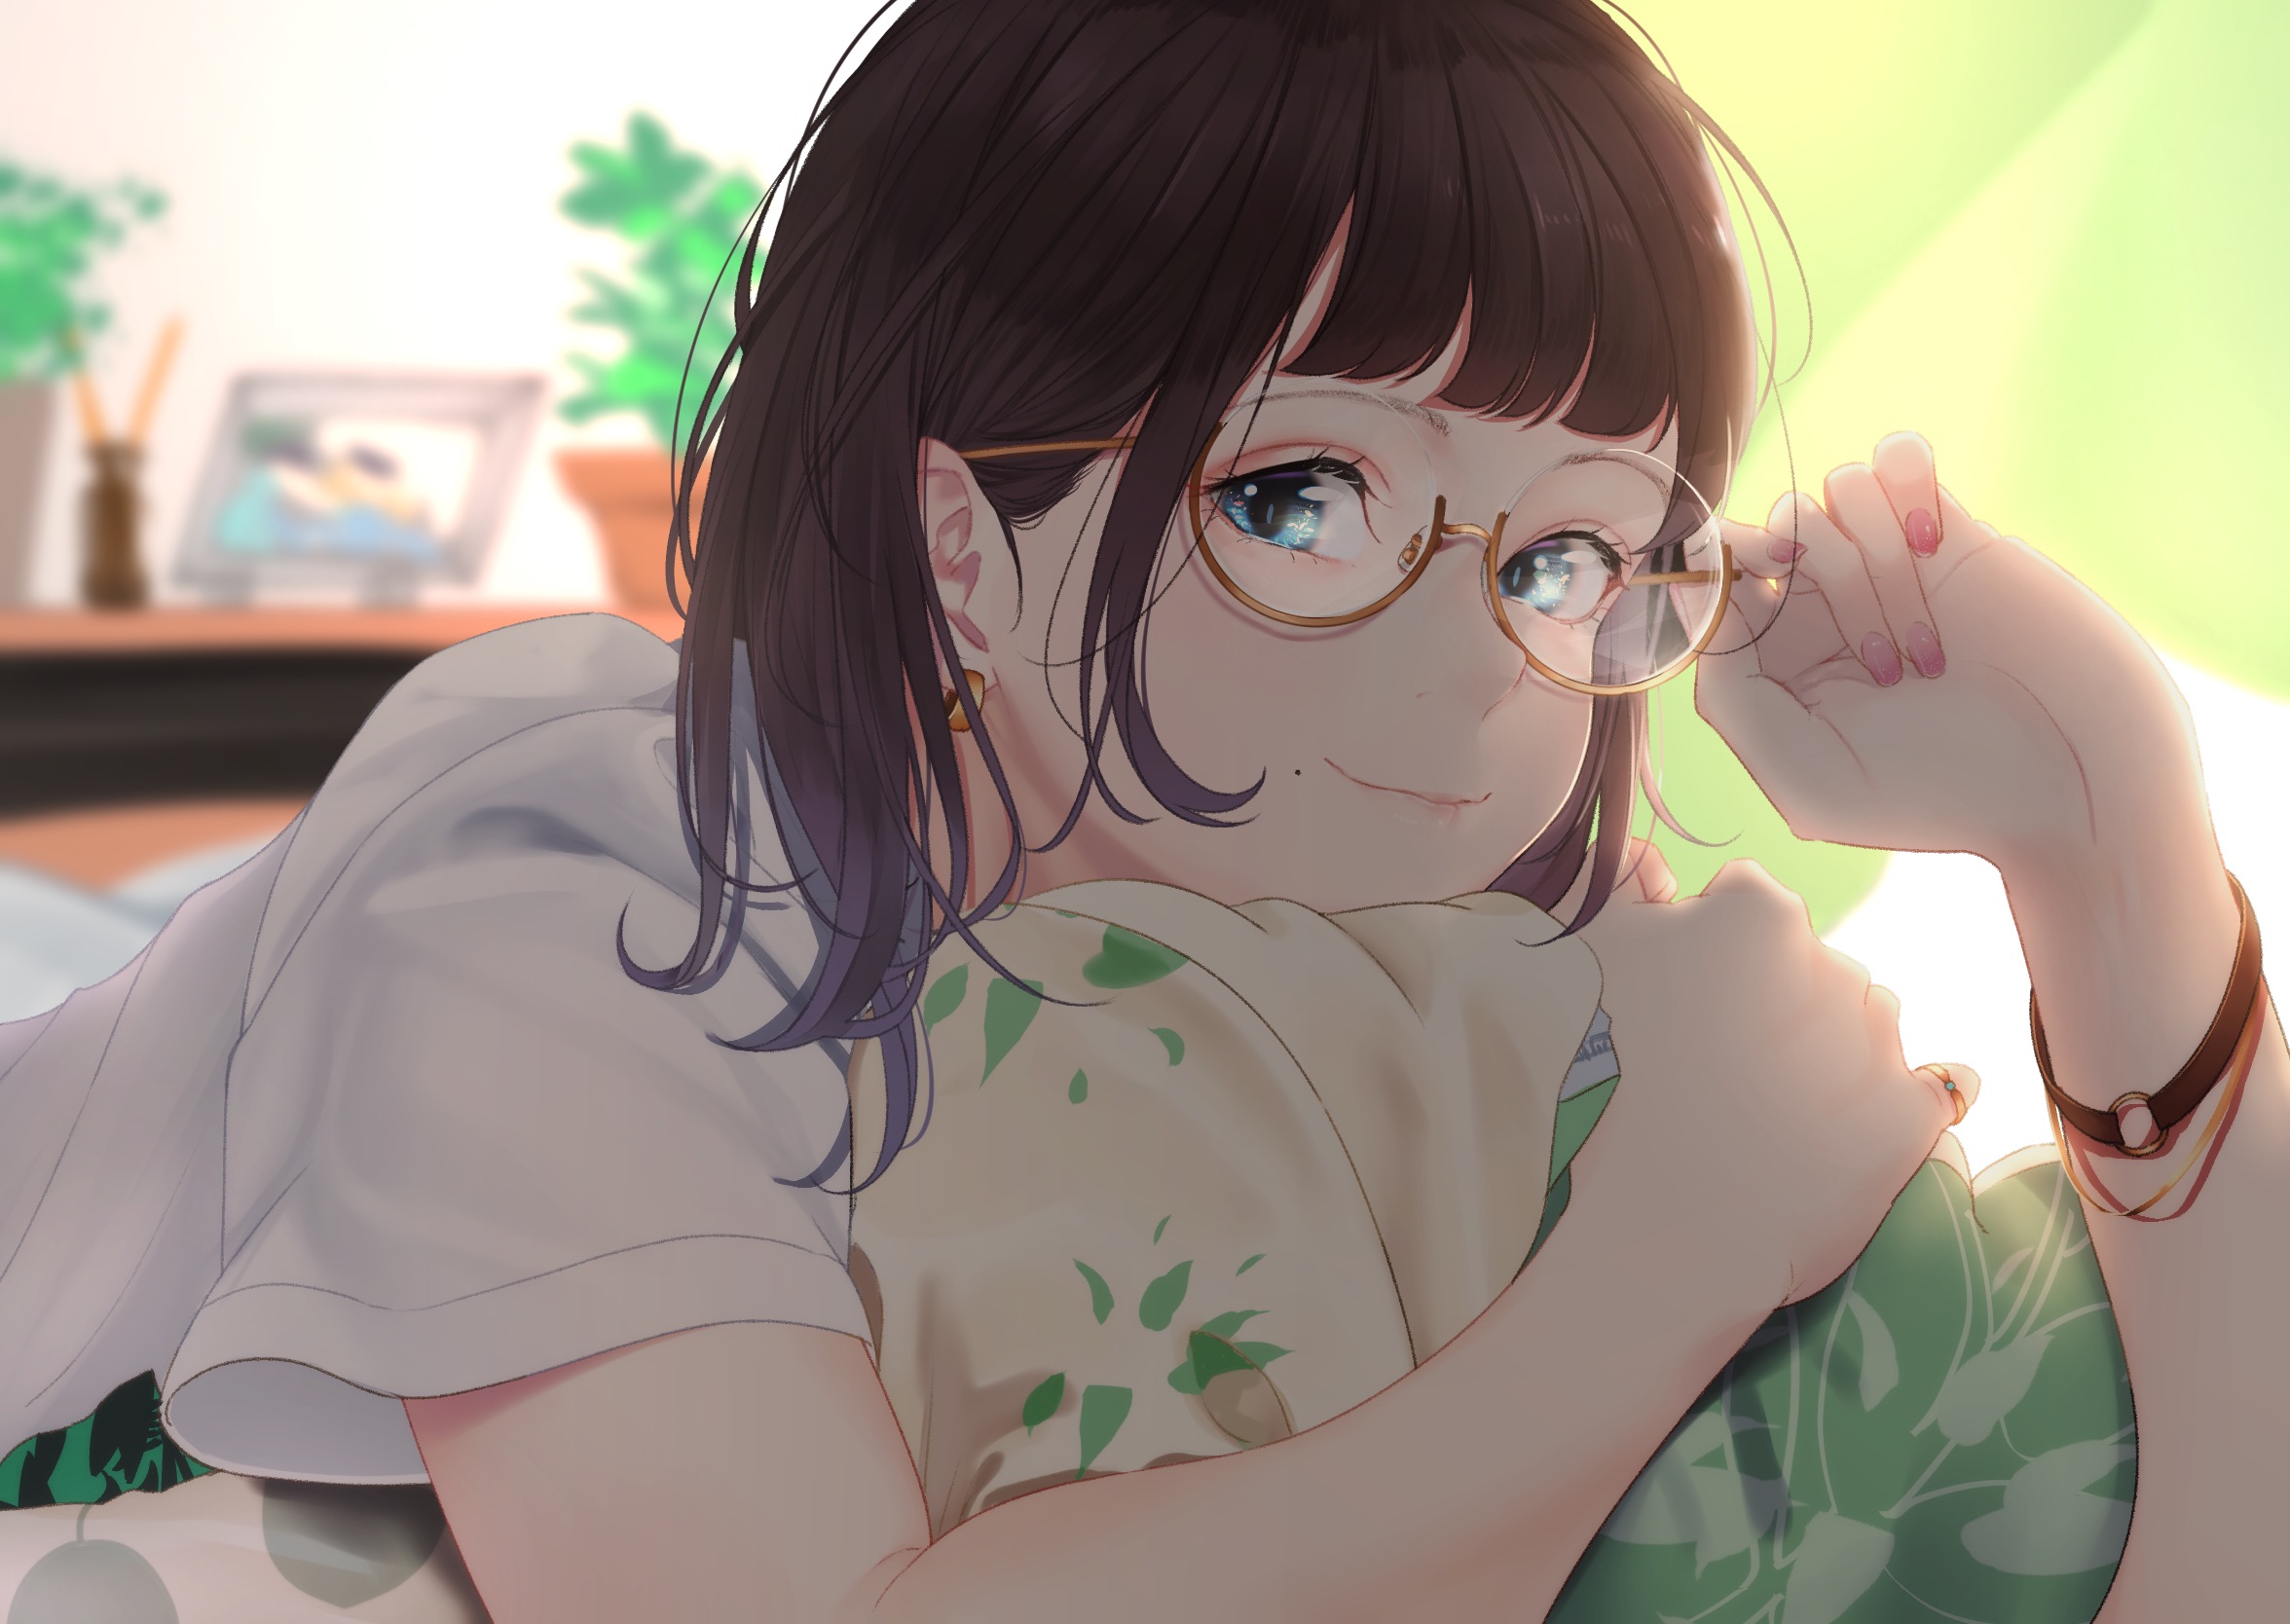 Cute girl holding on glasses by サイトー